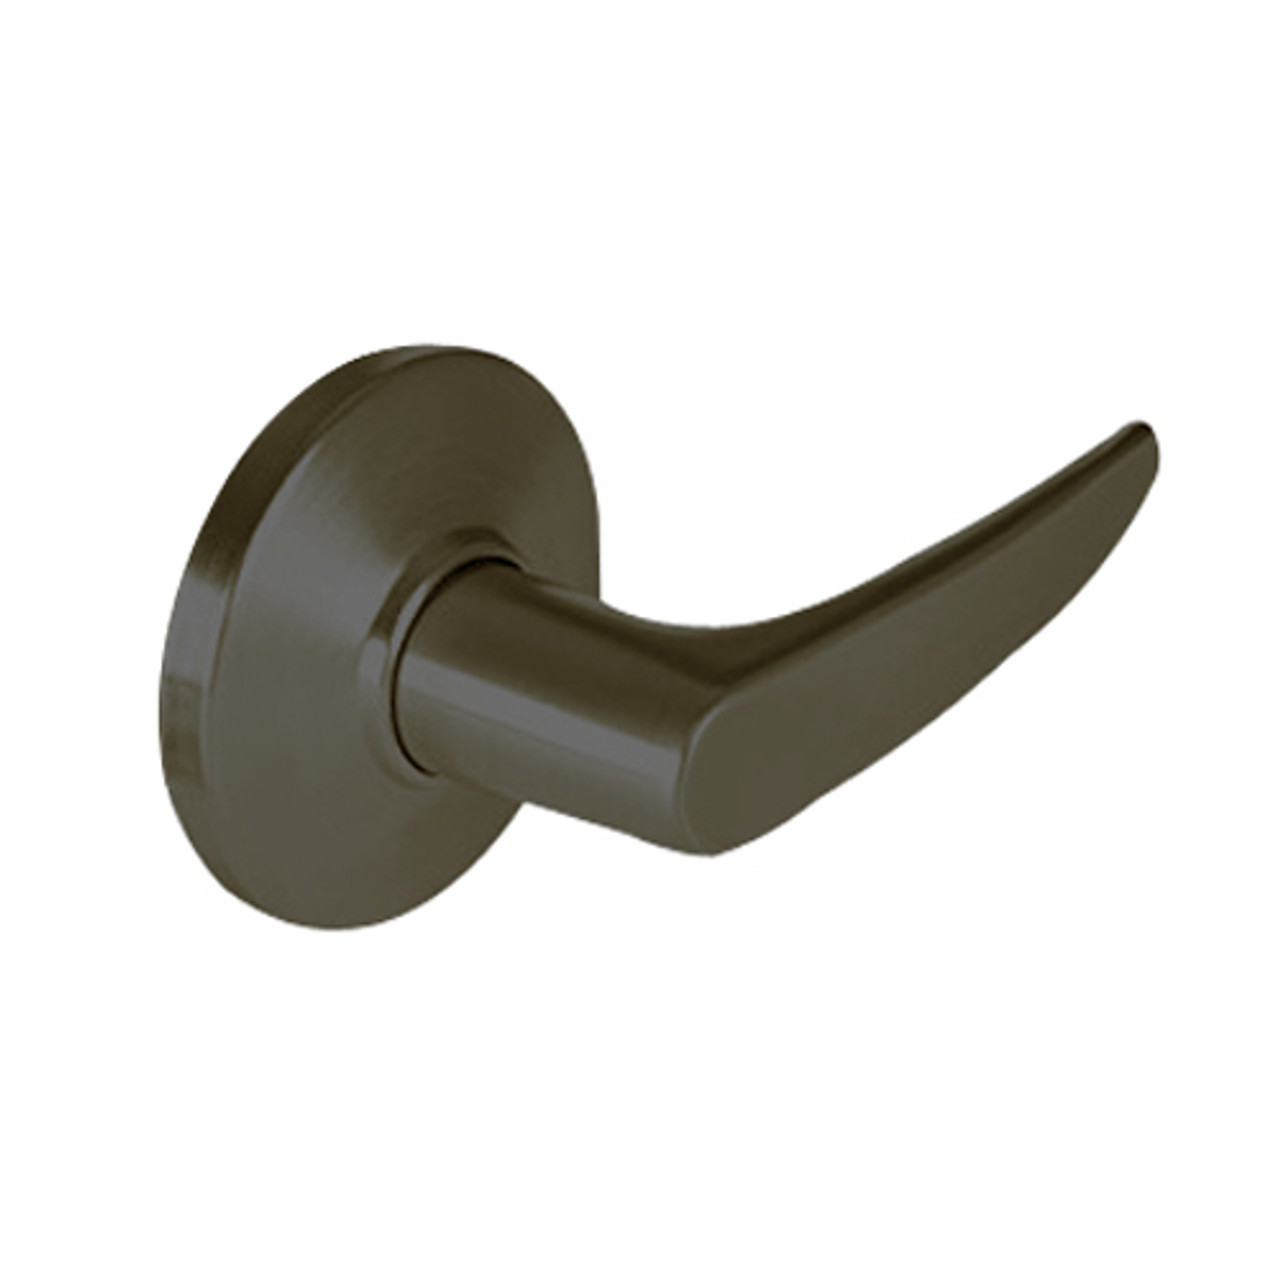 9K40Y16DSTK613LM Best 9K Series Exit Heavy Duty Cylindrical Lever Locks with Curved Without Return Lever Design in Oil Rubbed Bronze